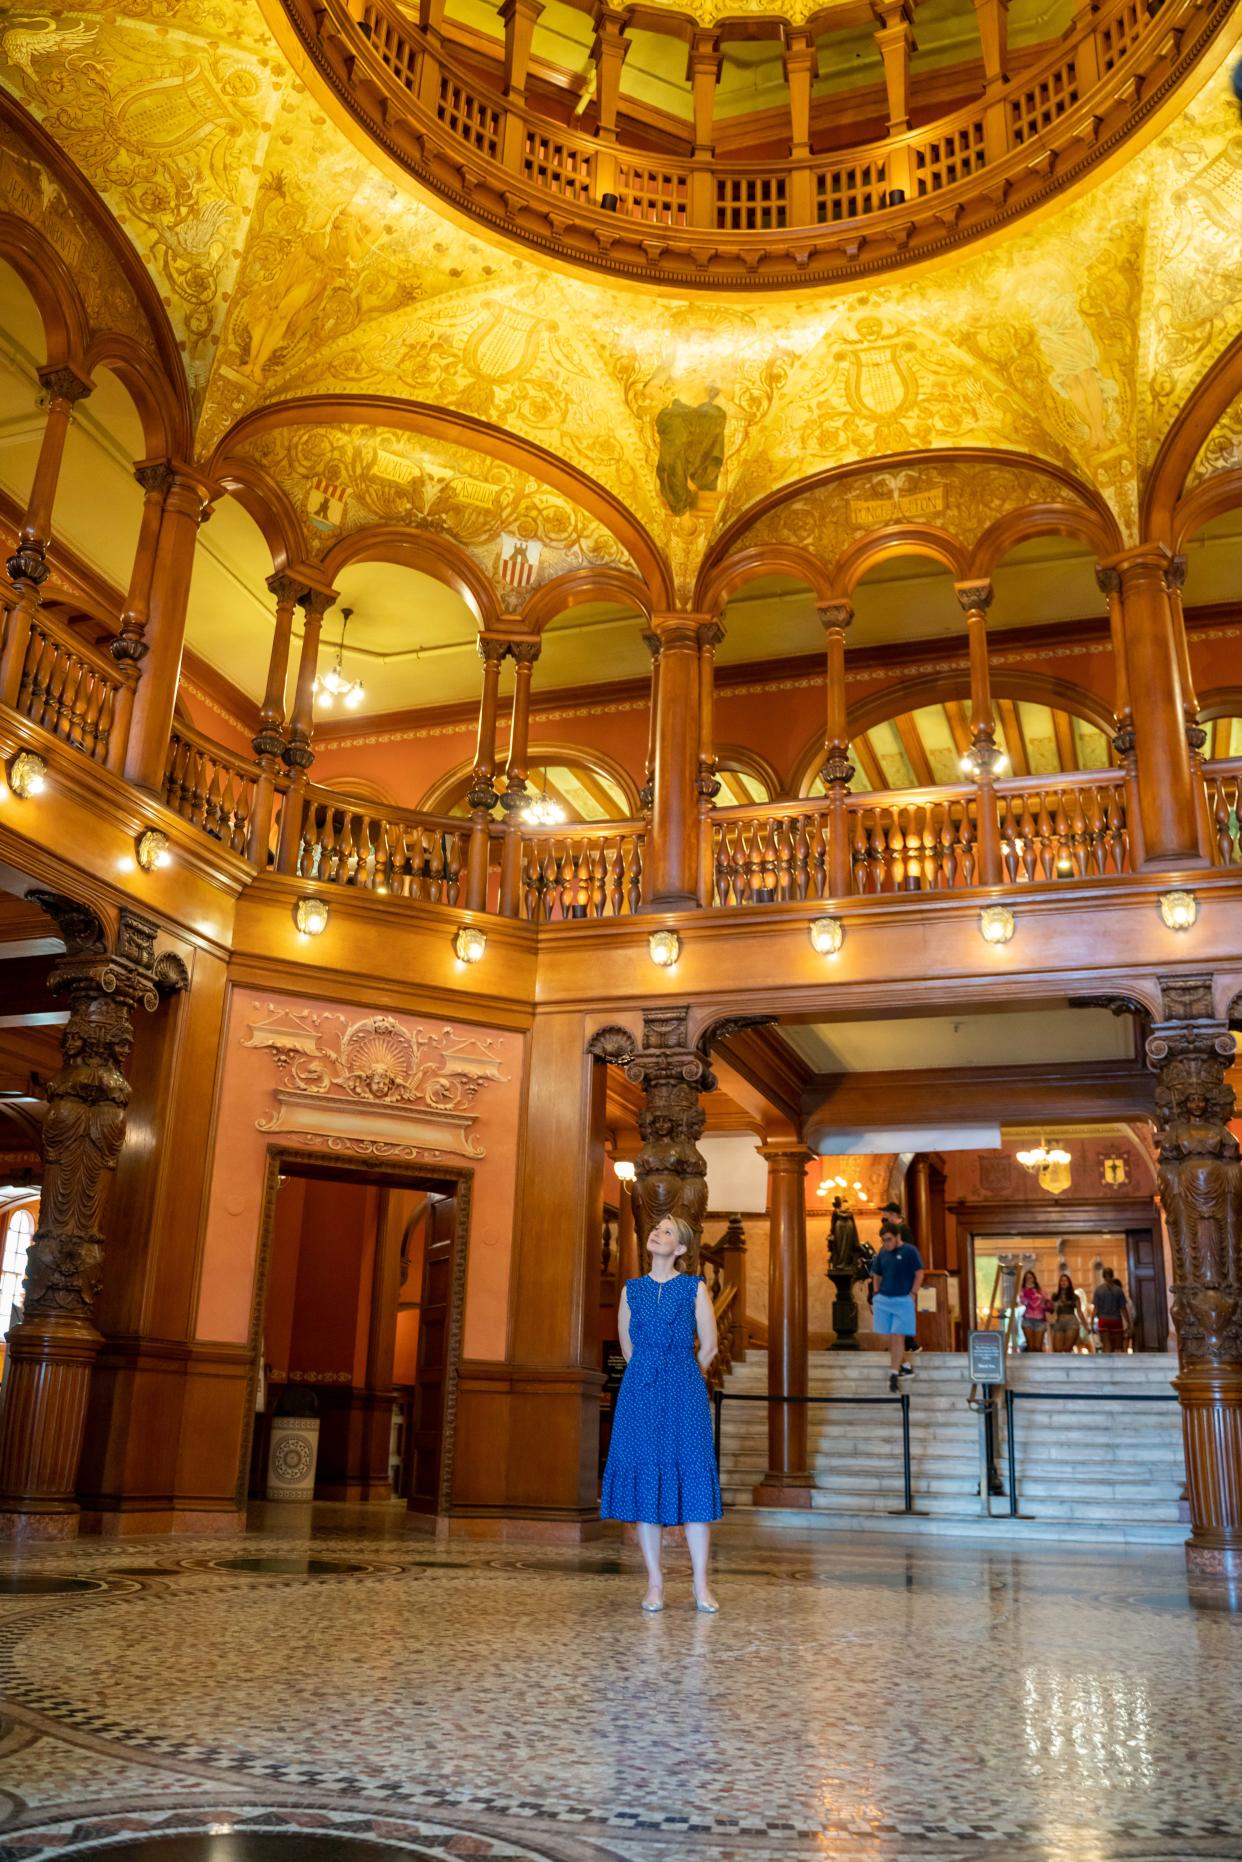 Samantha Brown visited Flagler College for an upcoming episode of her PBS series "Places to Love."